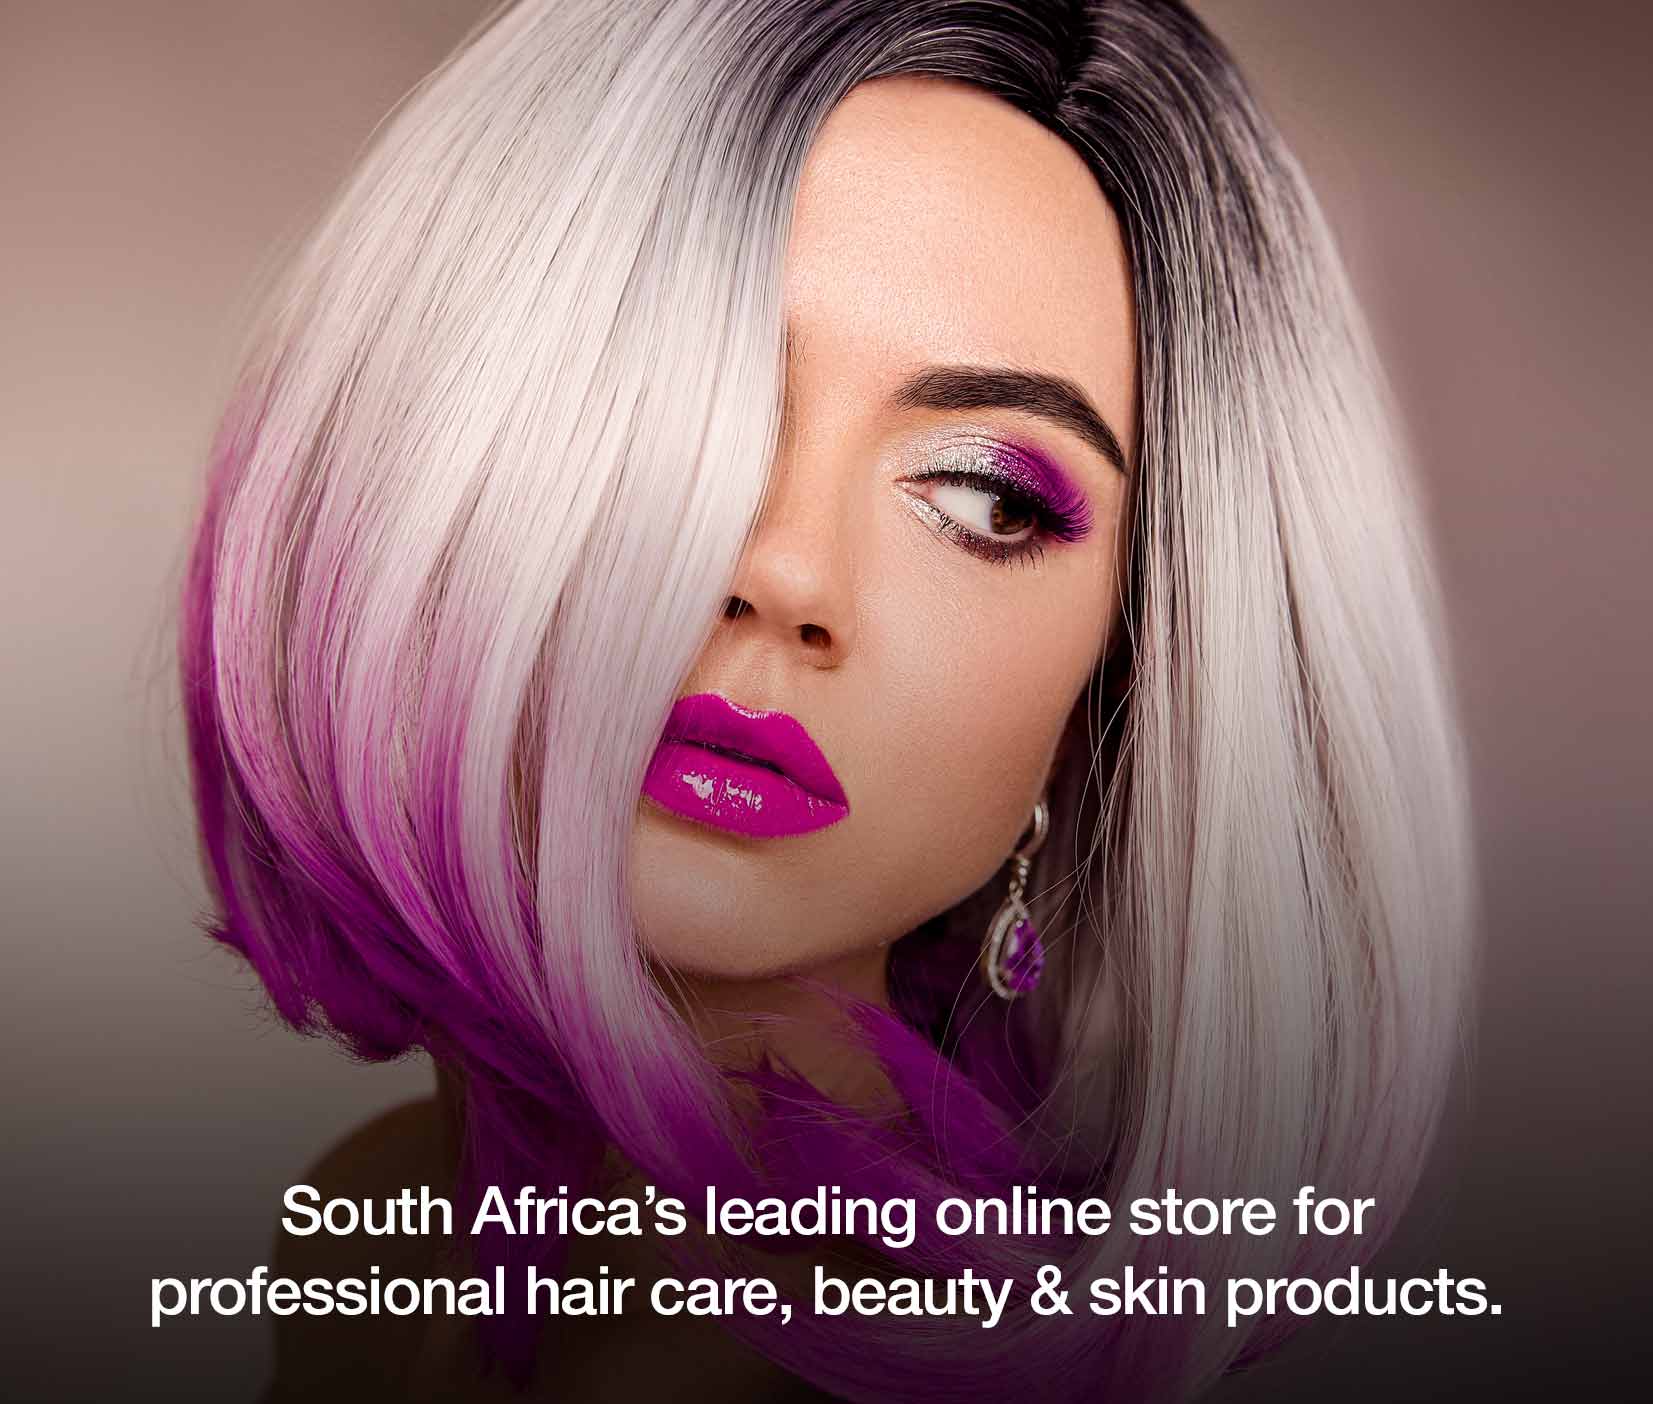 South Africa's leading online store for professional hair care, beauty and skin products.